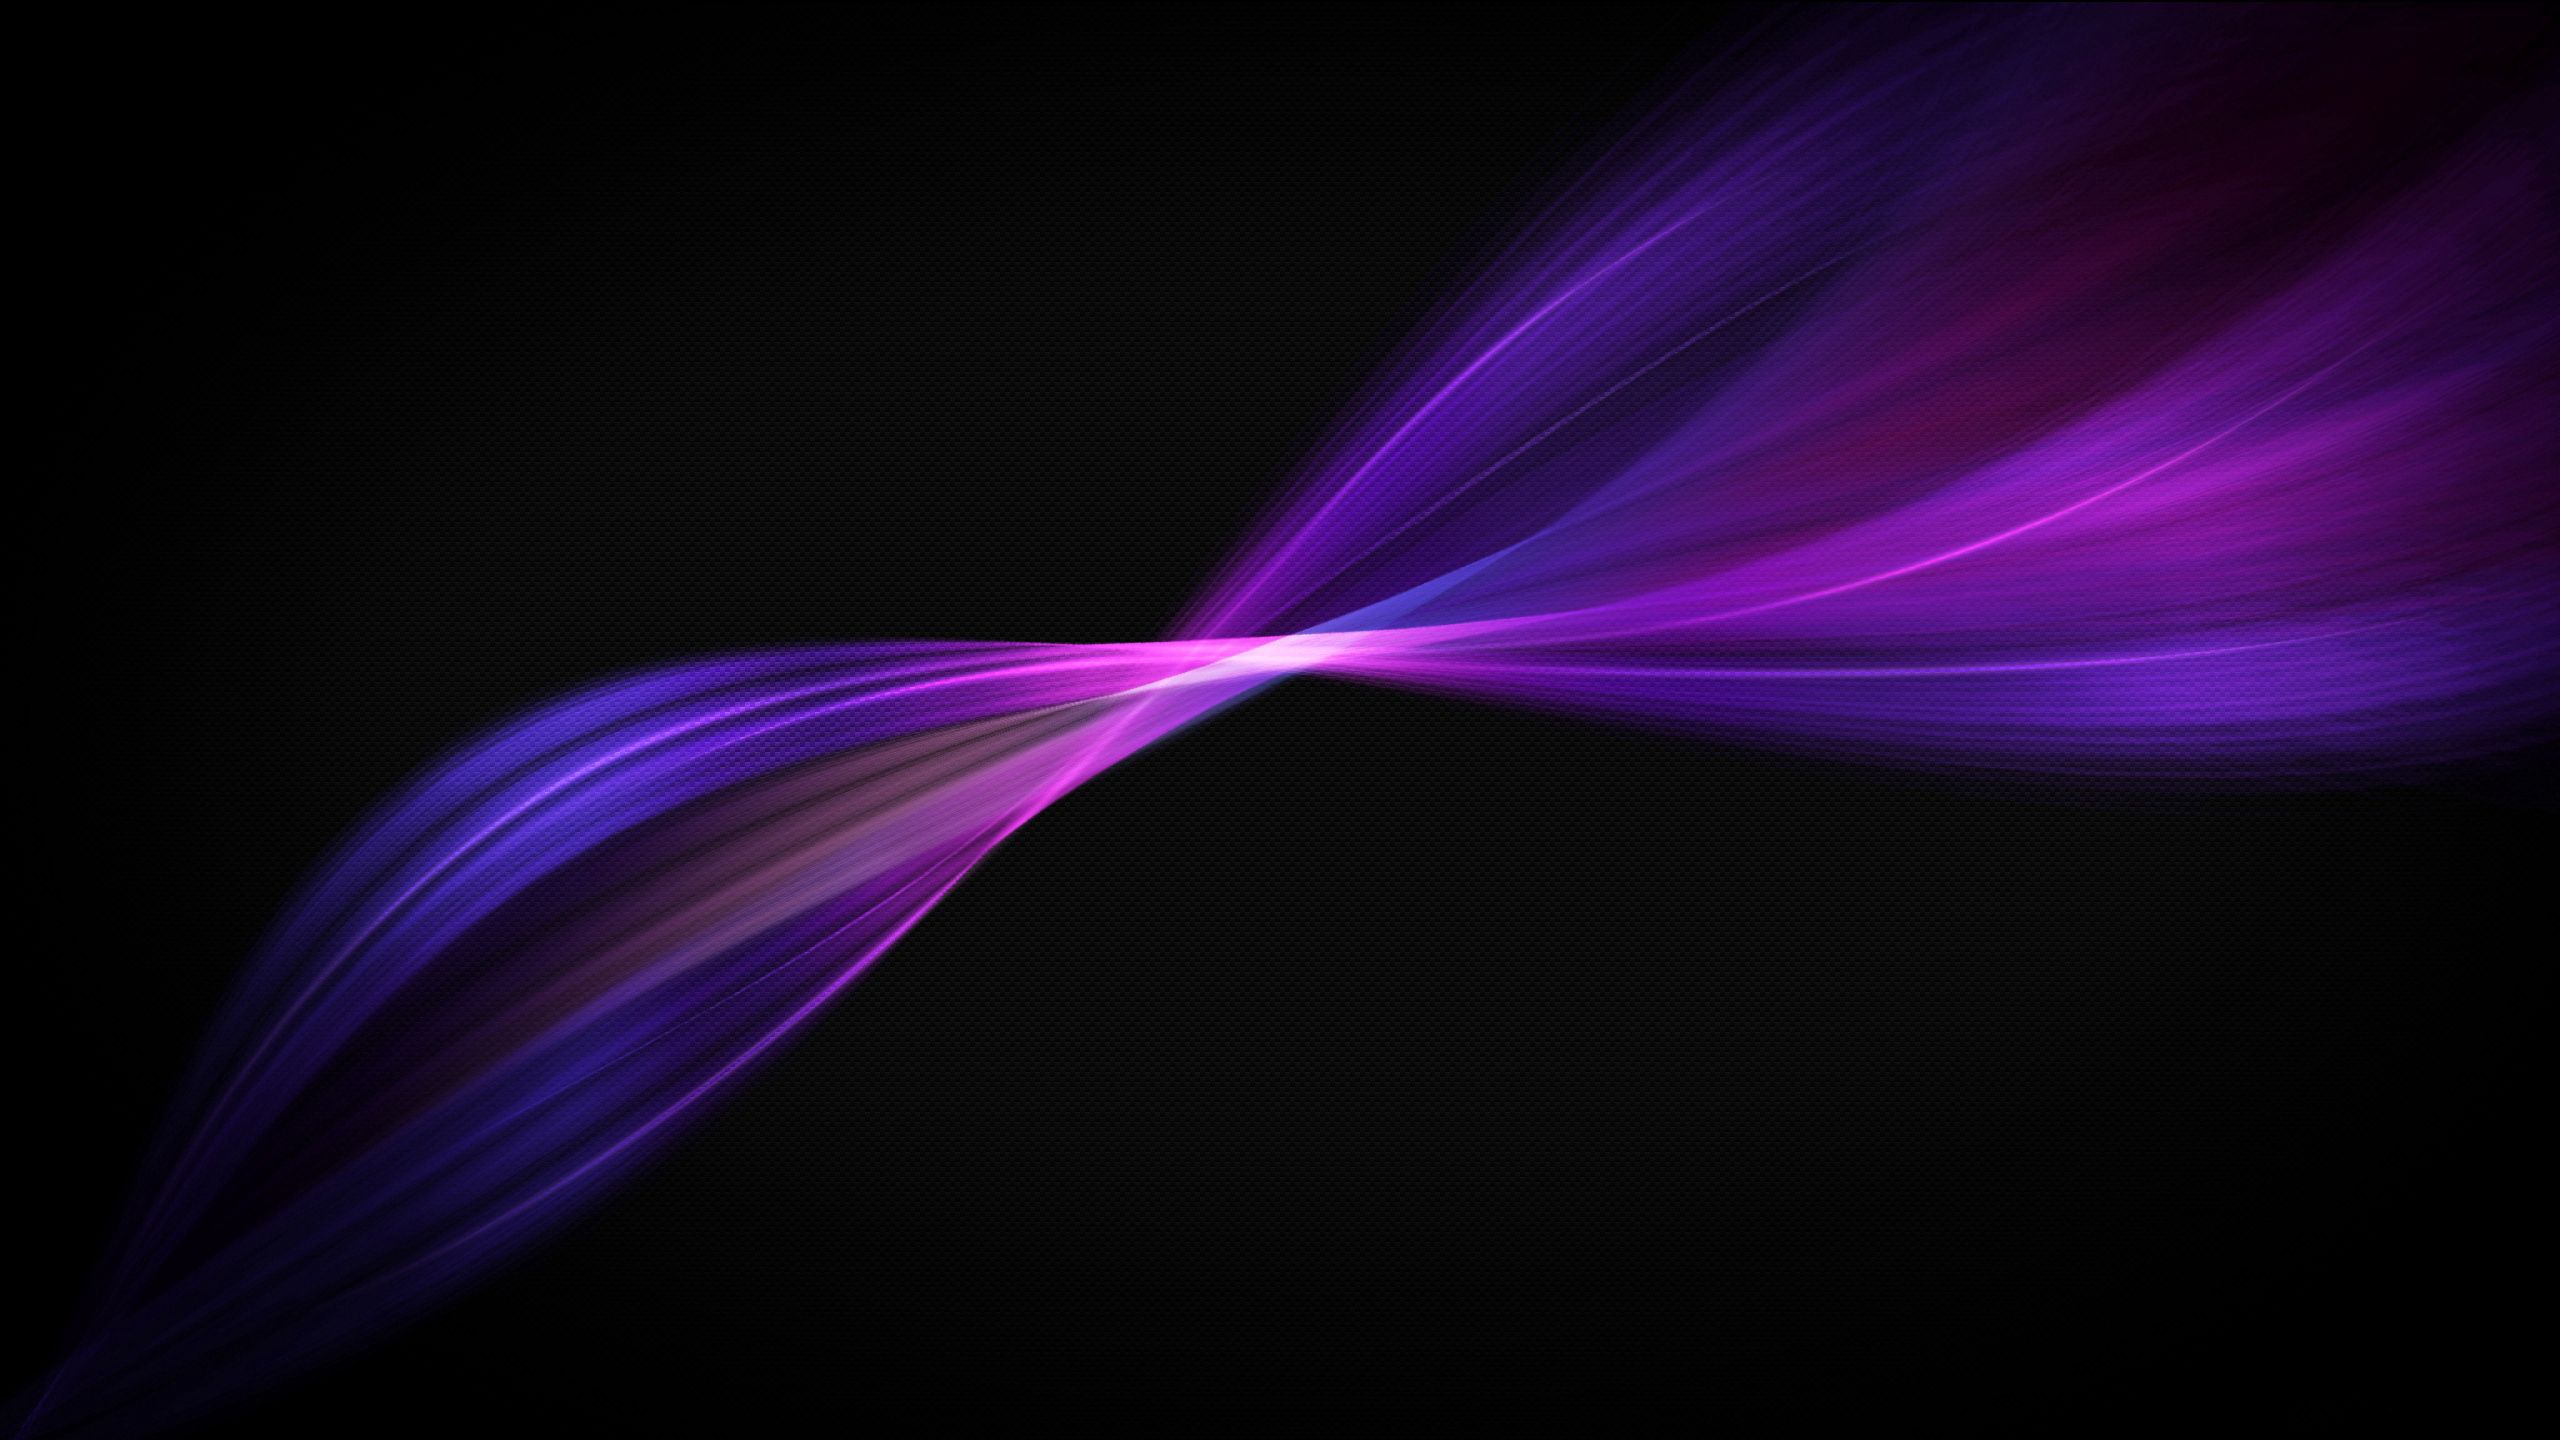 112086 Screensavers and Wallpapers Graphics for phone. Download background, abstract, violet, black, lines, color, purple, graphics pictures for free